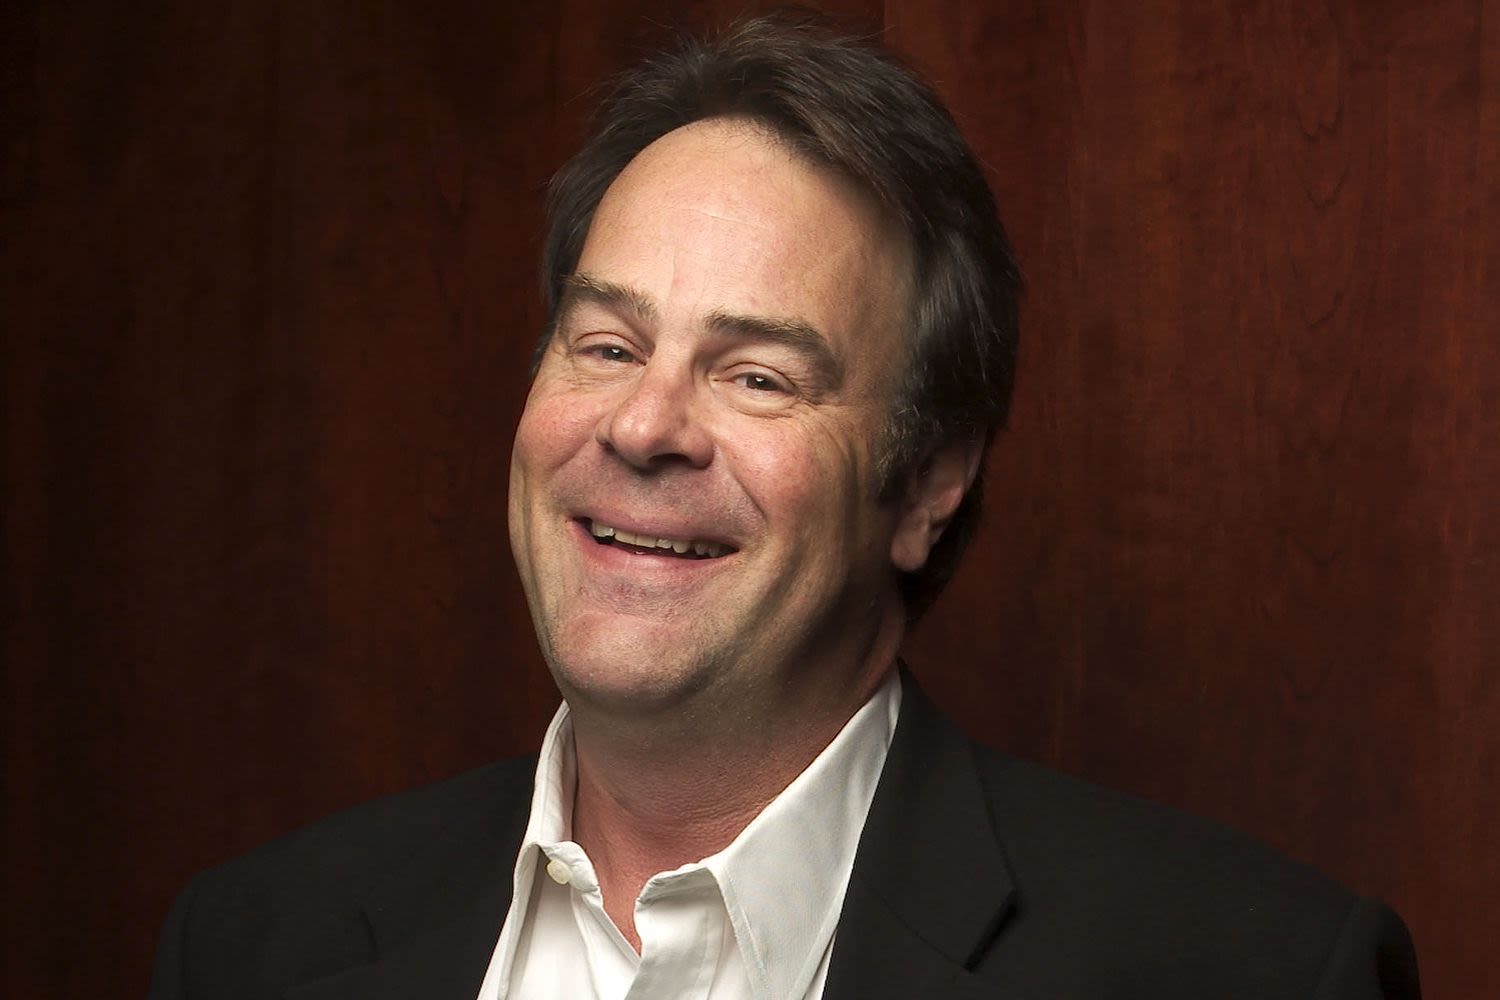 Dan Aykroyd Almost Ended Up as a Prison Guard — How His Parents Changed His Path